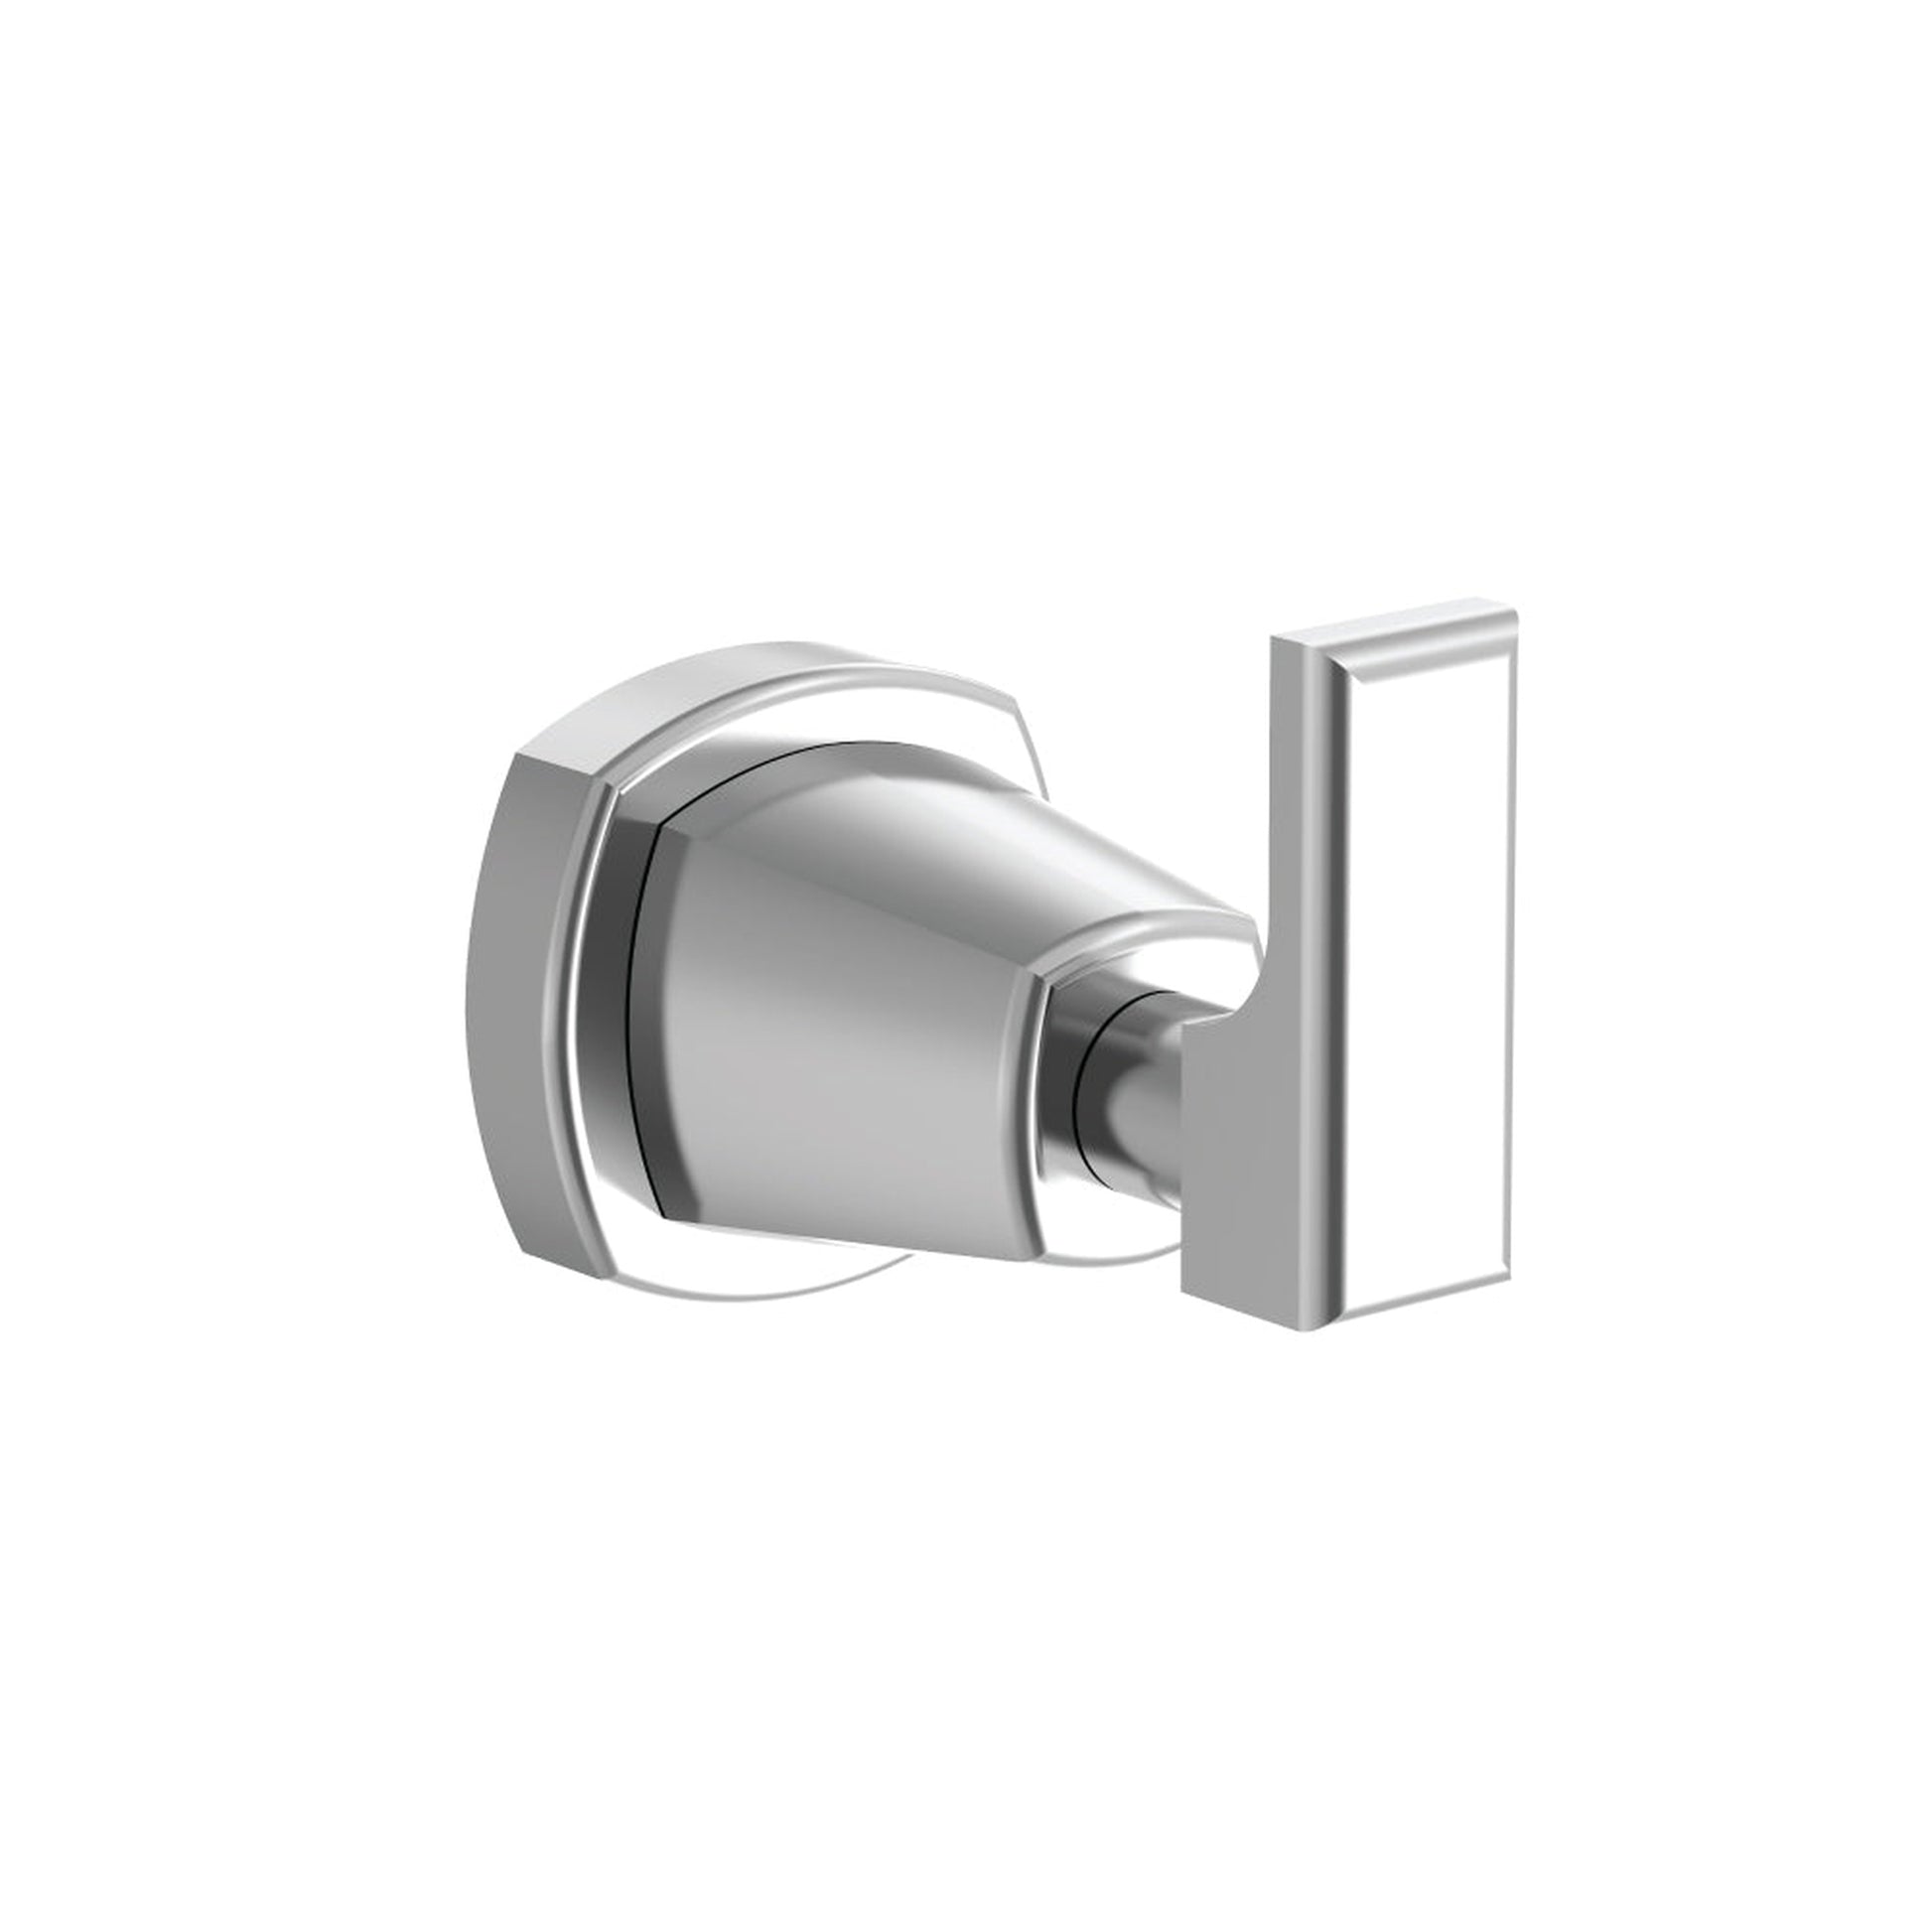 Isenberg Serie 240 2" Polished Nickel PVD Solid Brass Wall-Mounted Bathroom Towel and Robe Hook